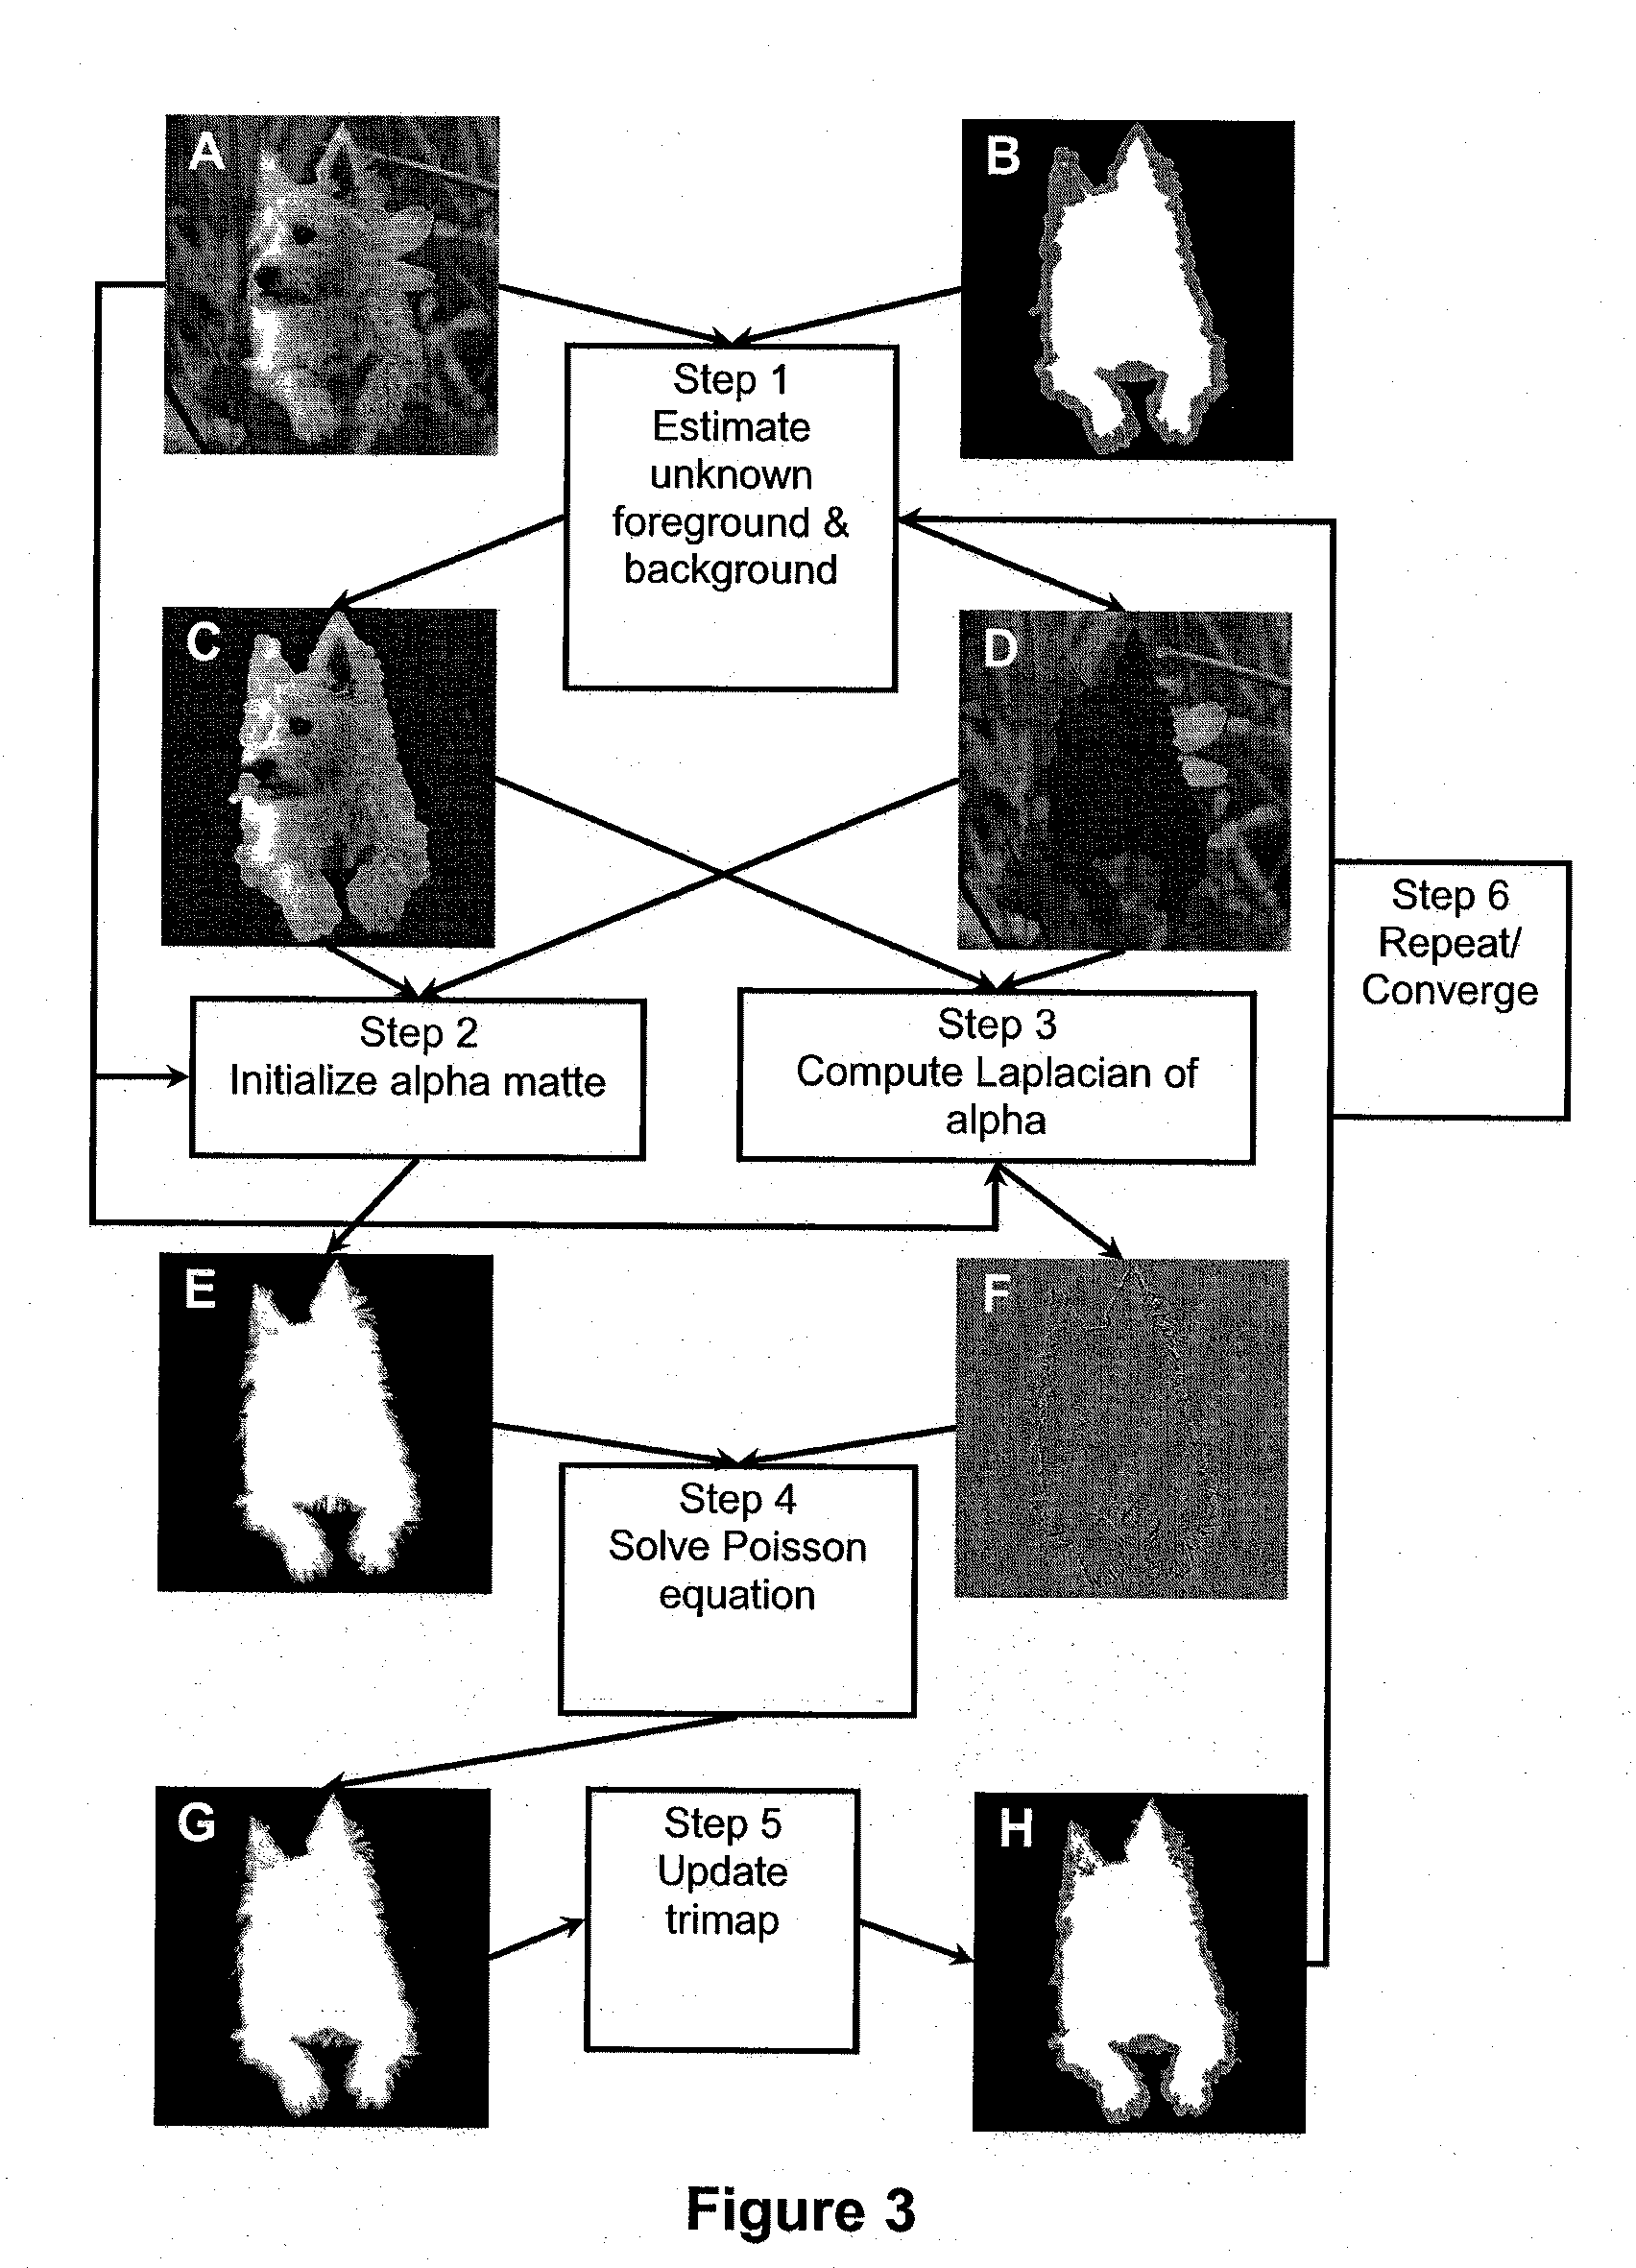 Real-time image and video matting